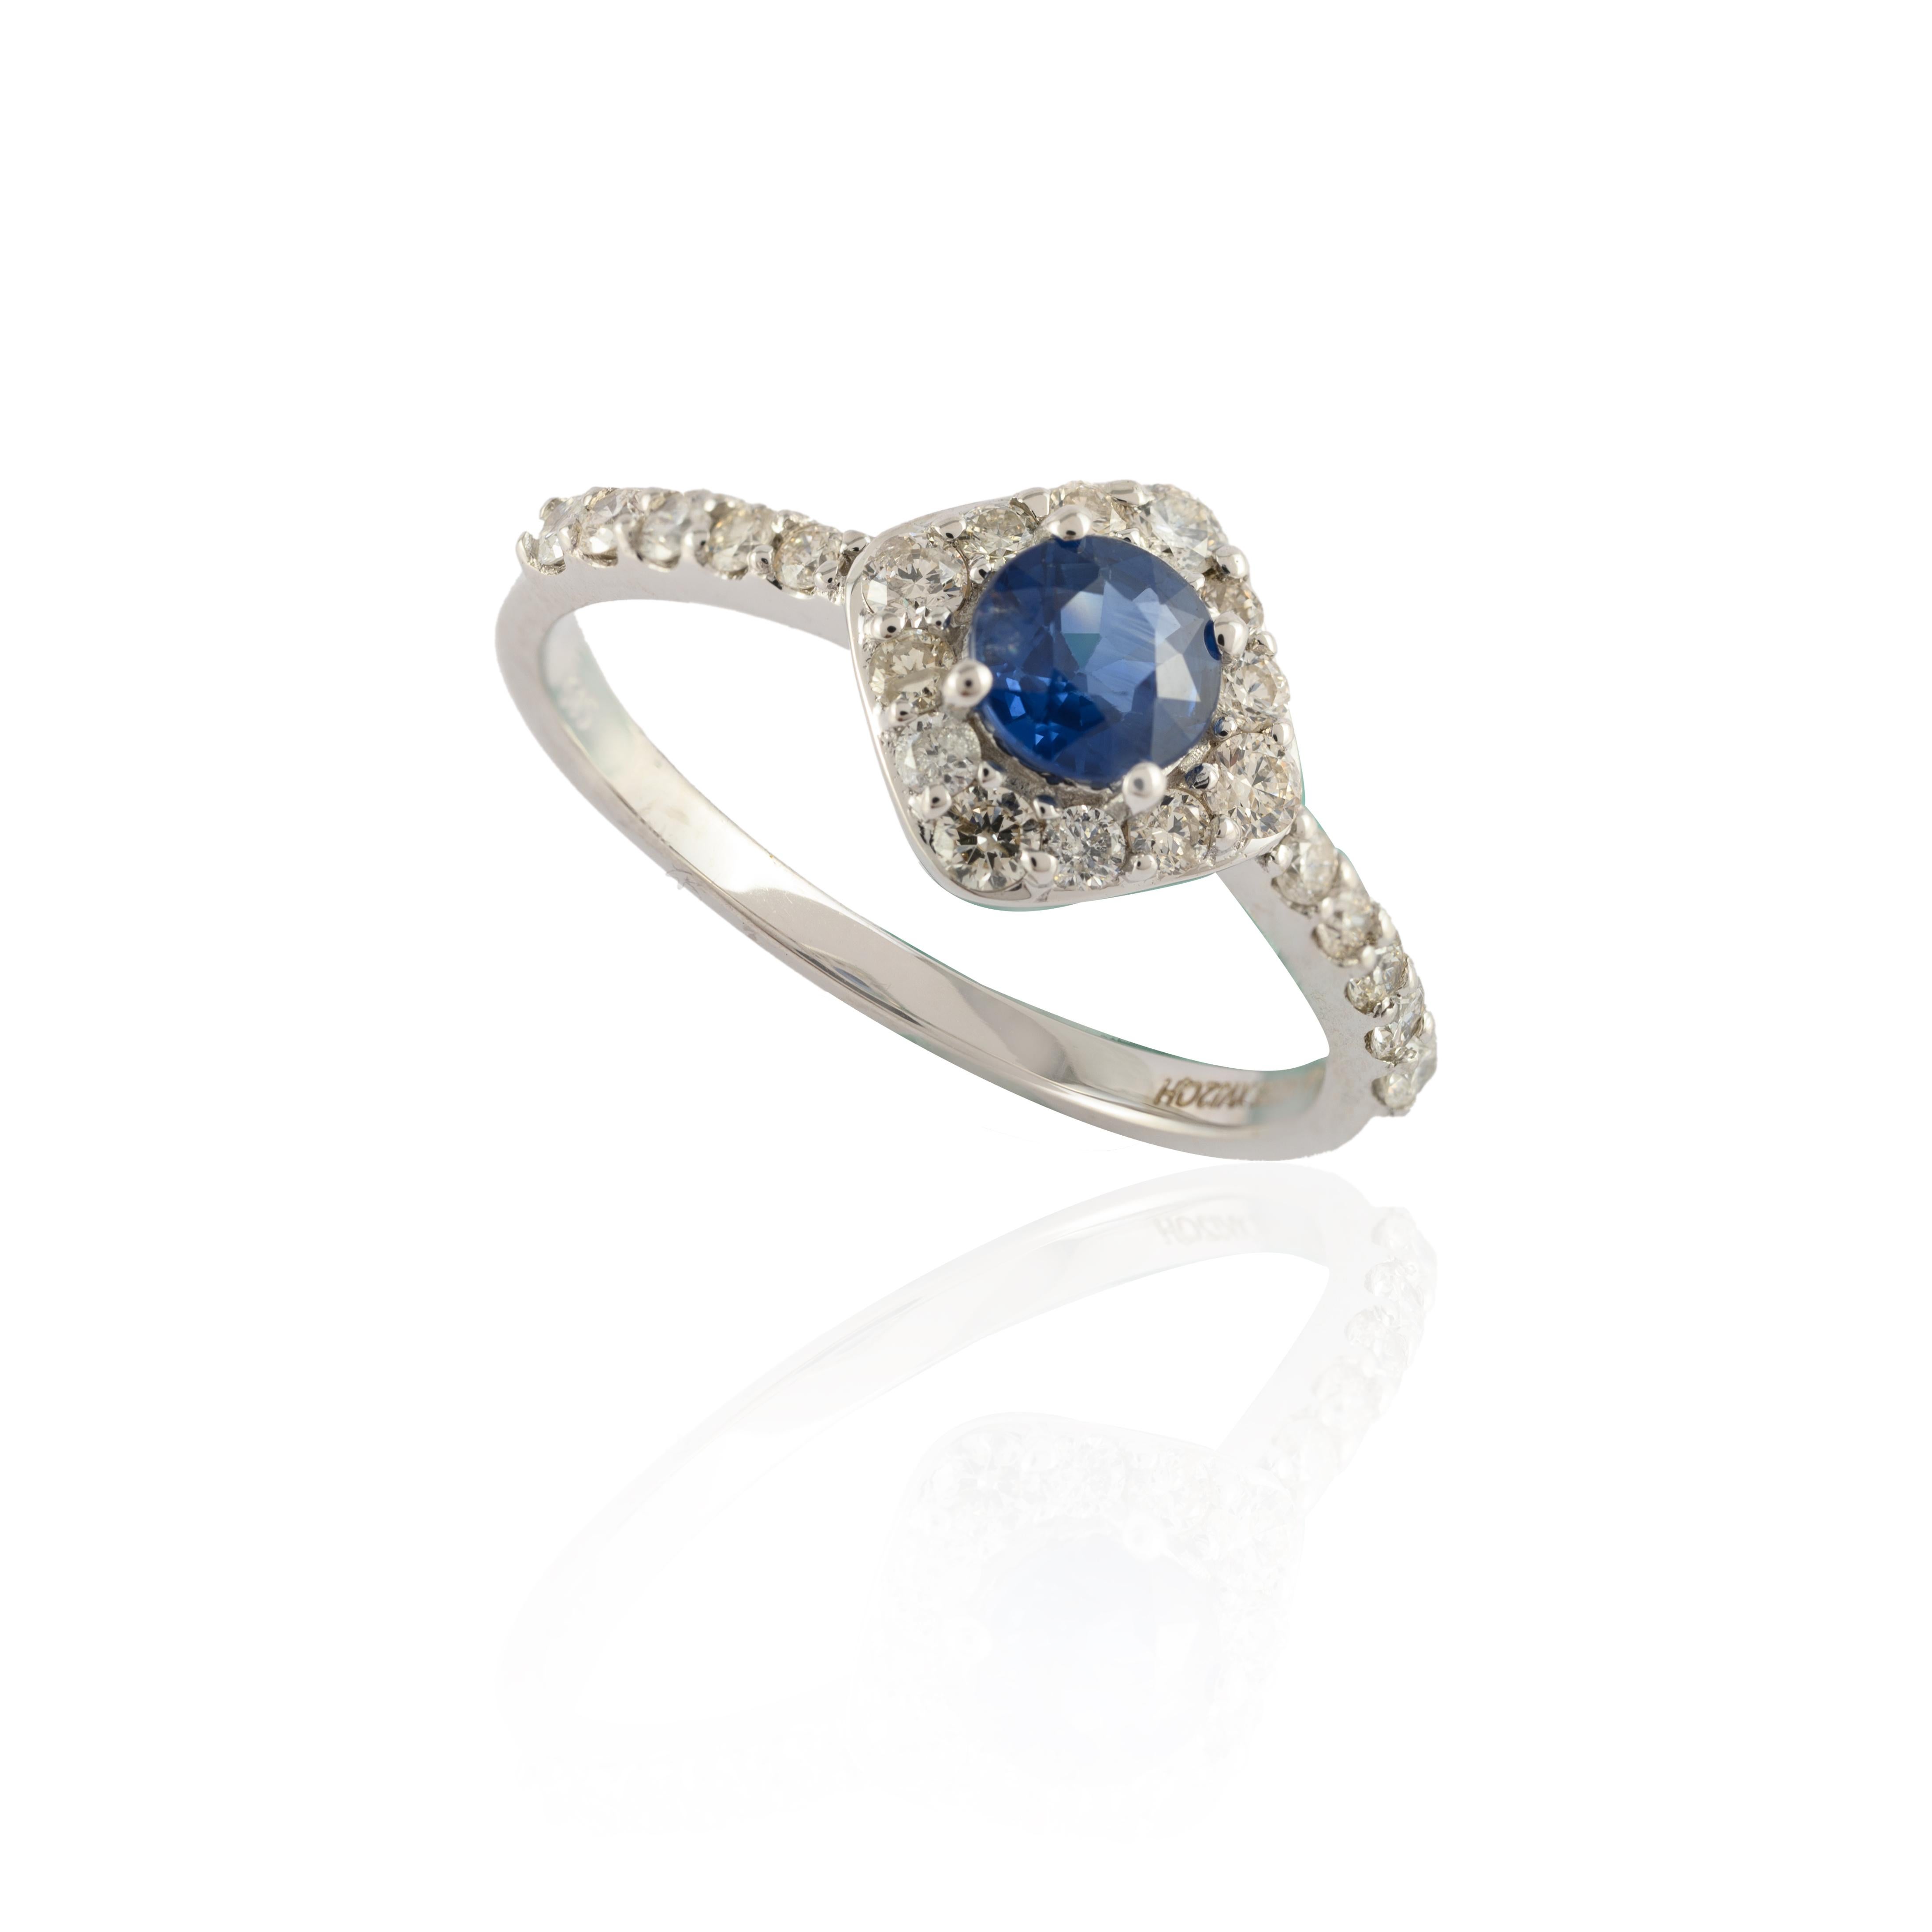 For Sale:  Royal Blue Sapphire with Halo Diamond Ring Crafted in Solid 14k White Gold 12